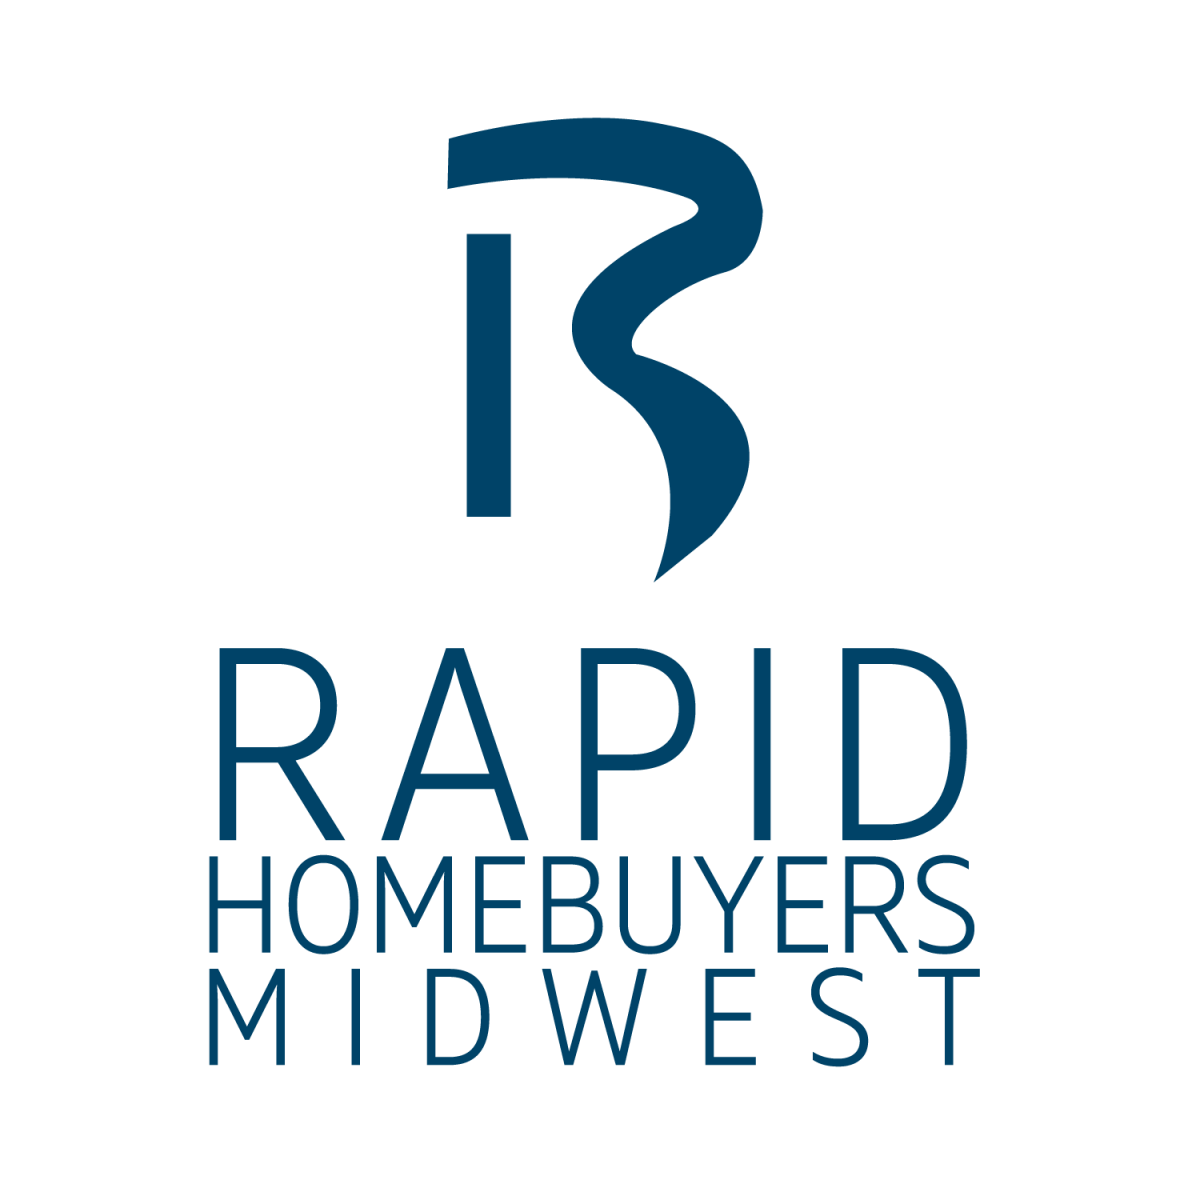 Rapid Home Buyers Midwest logo